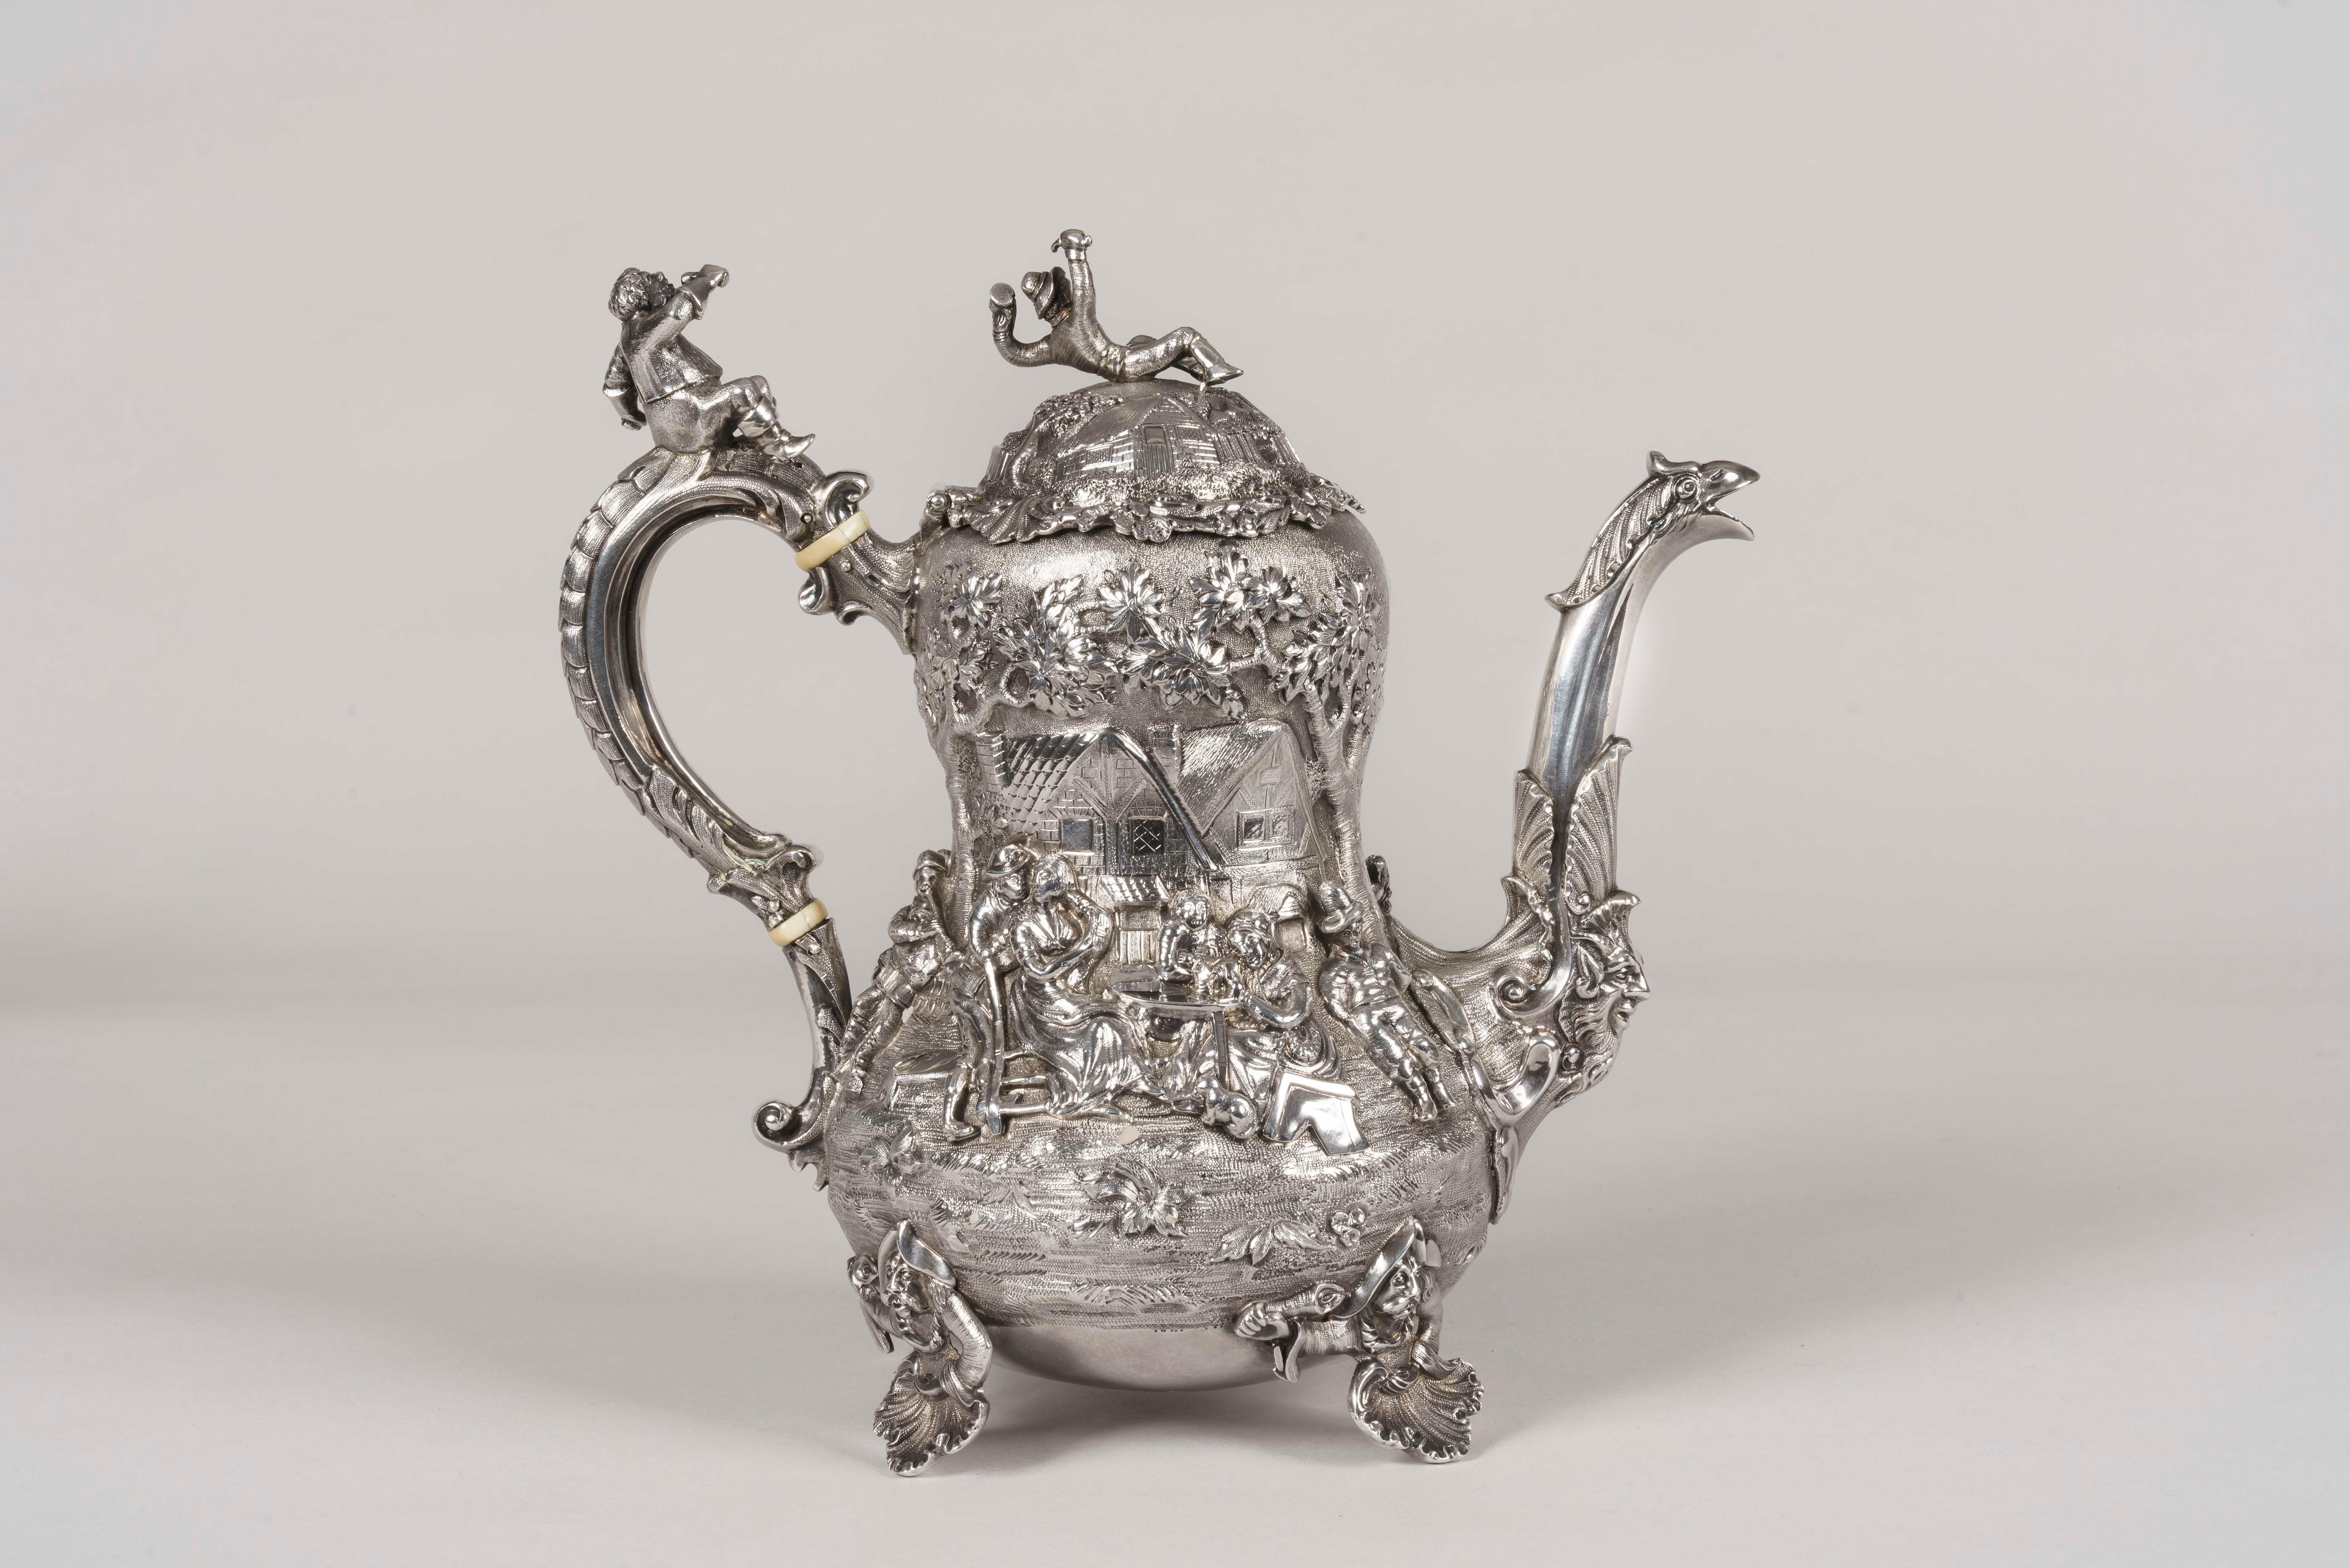 An exquisite tea & coffee service
Made by Joseph Angell

Assayed in London in 1852-1853, the solid silver 4-piece service in the manner of Edward Farrell decorated in high relief with scenes of merry-making and tavern interiors in the style of